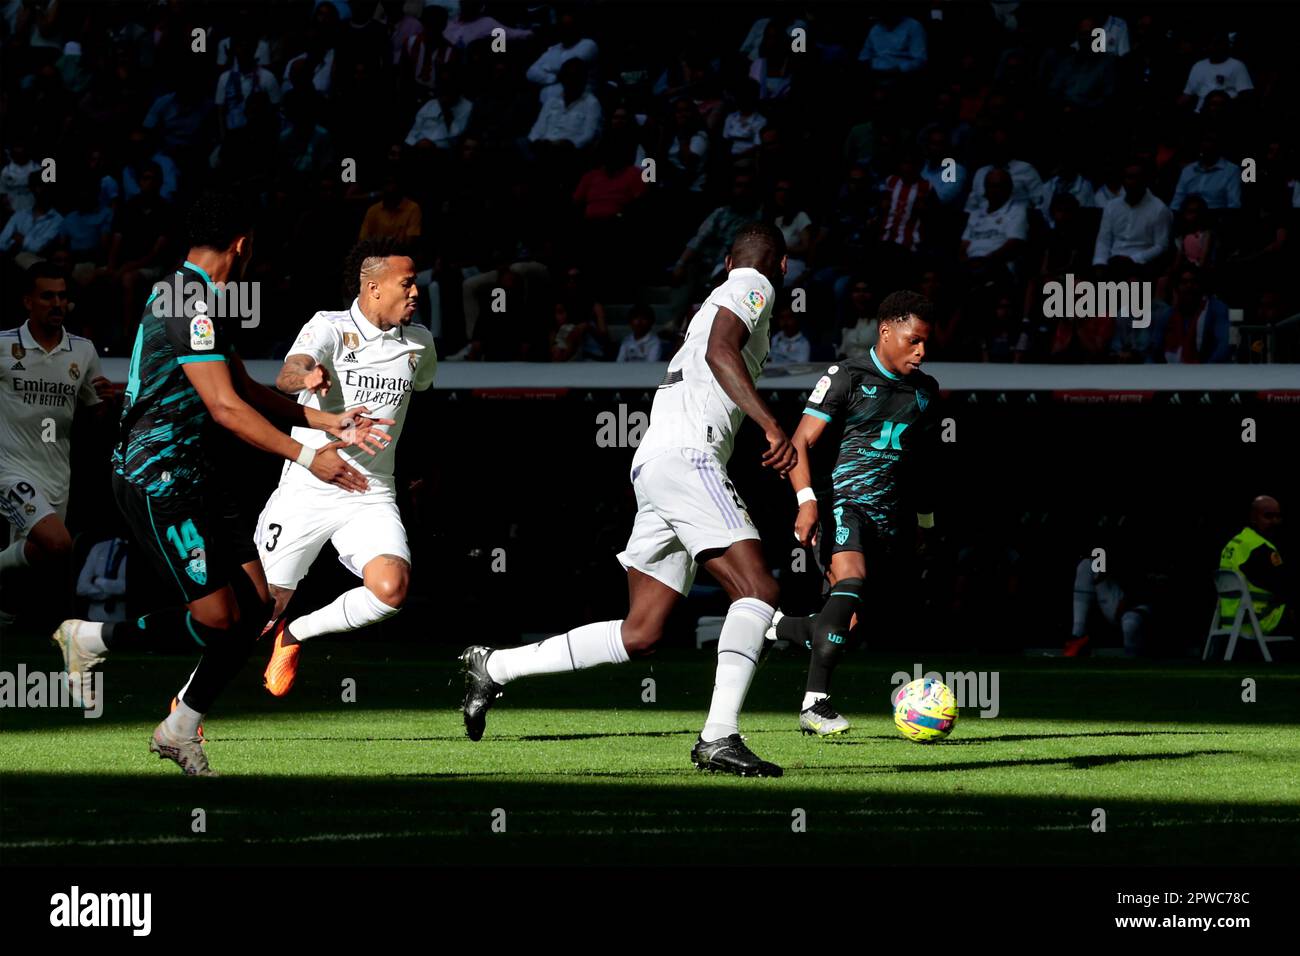 Madrid, Spain. 29th Apr, 2023. Madrid, Spain, 29.04.2023.- Almeria player Ramazani shot. Real Madrid vs Almeria match of the Spanish Soccer League on matchday 32 held at the Santiago Bernabeu Stadium in the capital of the Kingdom of Spain. Final result 4-2. Real Madrid goals from Benzema 2 ,17 , 42 (P), Rodrygo 47 . Goals from Almeria Lazaro Vinicius 40' 5, and Lucas Robertone 61' Credit: Juan Carlos Rojas/dpa/Alamy Live News Stock Photo